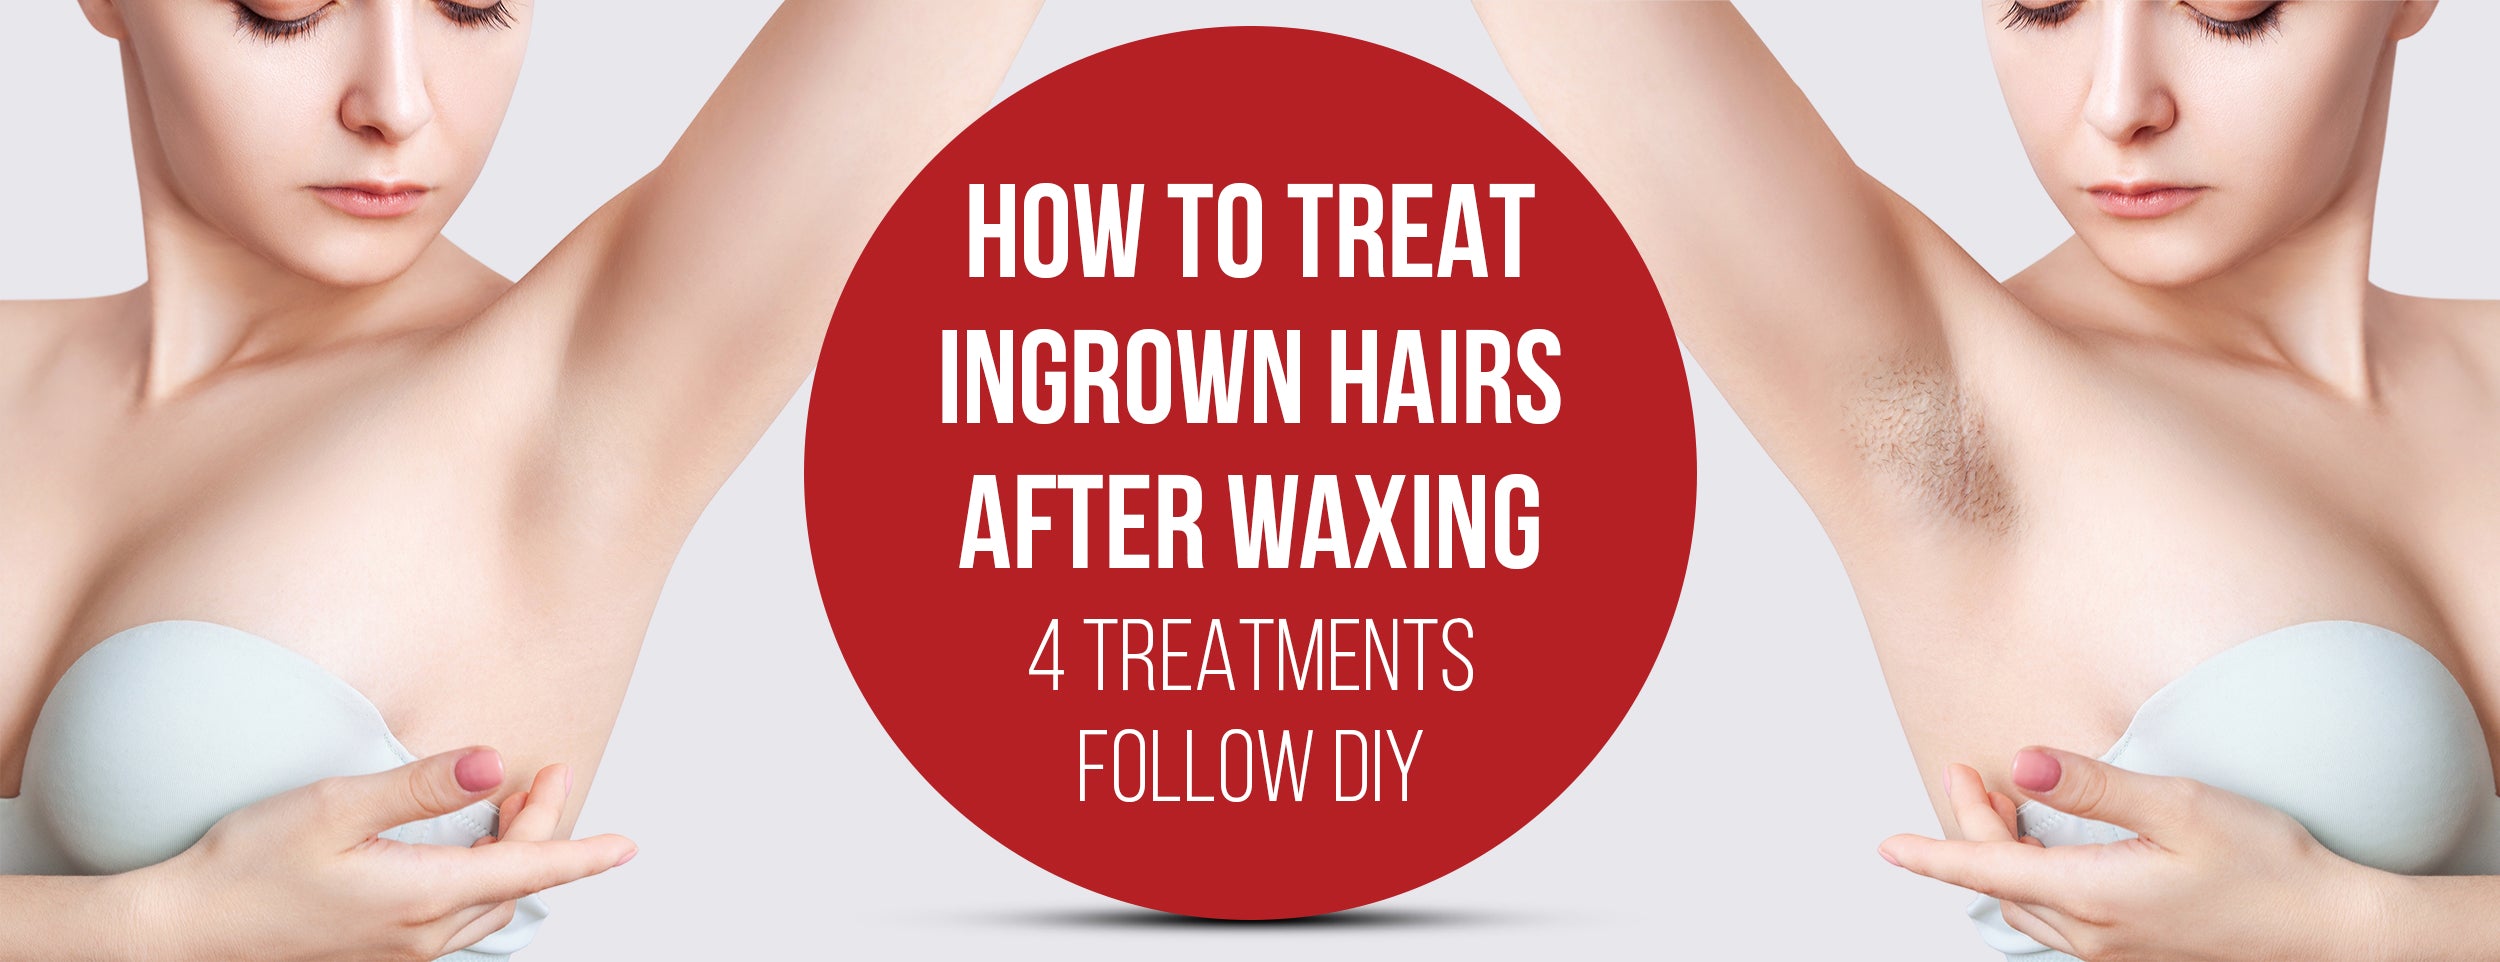 4 Treatments & Prevention Tips for Ingrown Hairs After Waxing